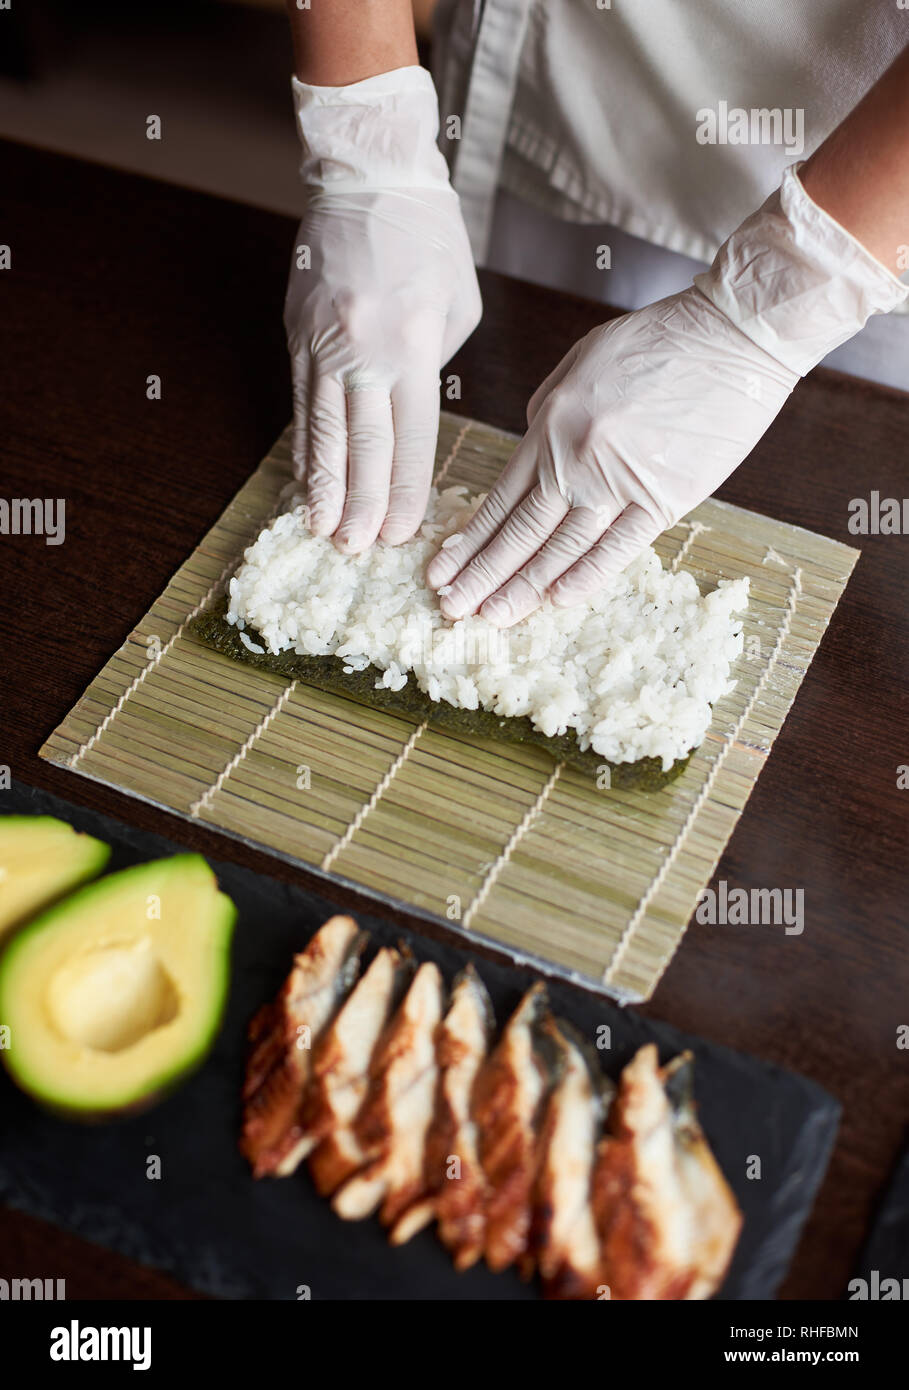 https://c8.alamy.com/comp/RHFBMN/close-up-view-of-process-of-preparing-rolling-sushi-nori-and-white-rice-on-bamboo-mat-chefs-hands-touch-rice-chef-starts-cooking-sushi-eel-and-avocado-RHFBMN.jpg